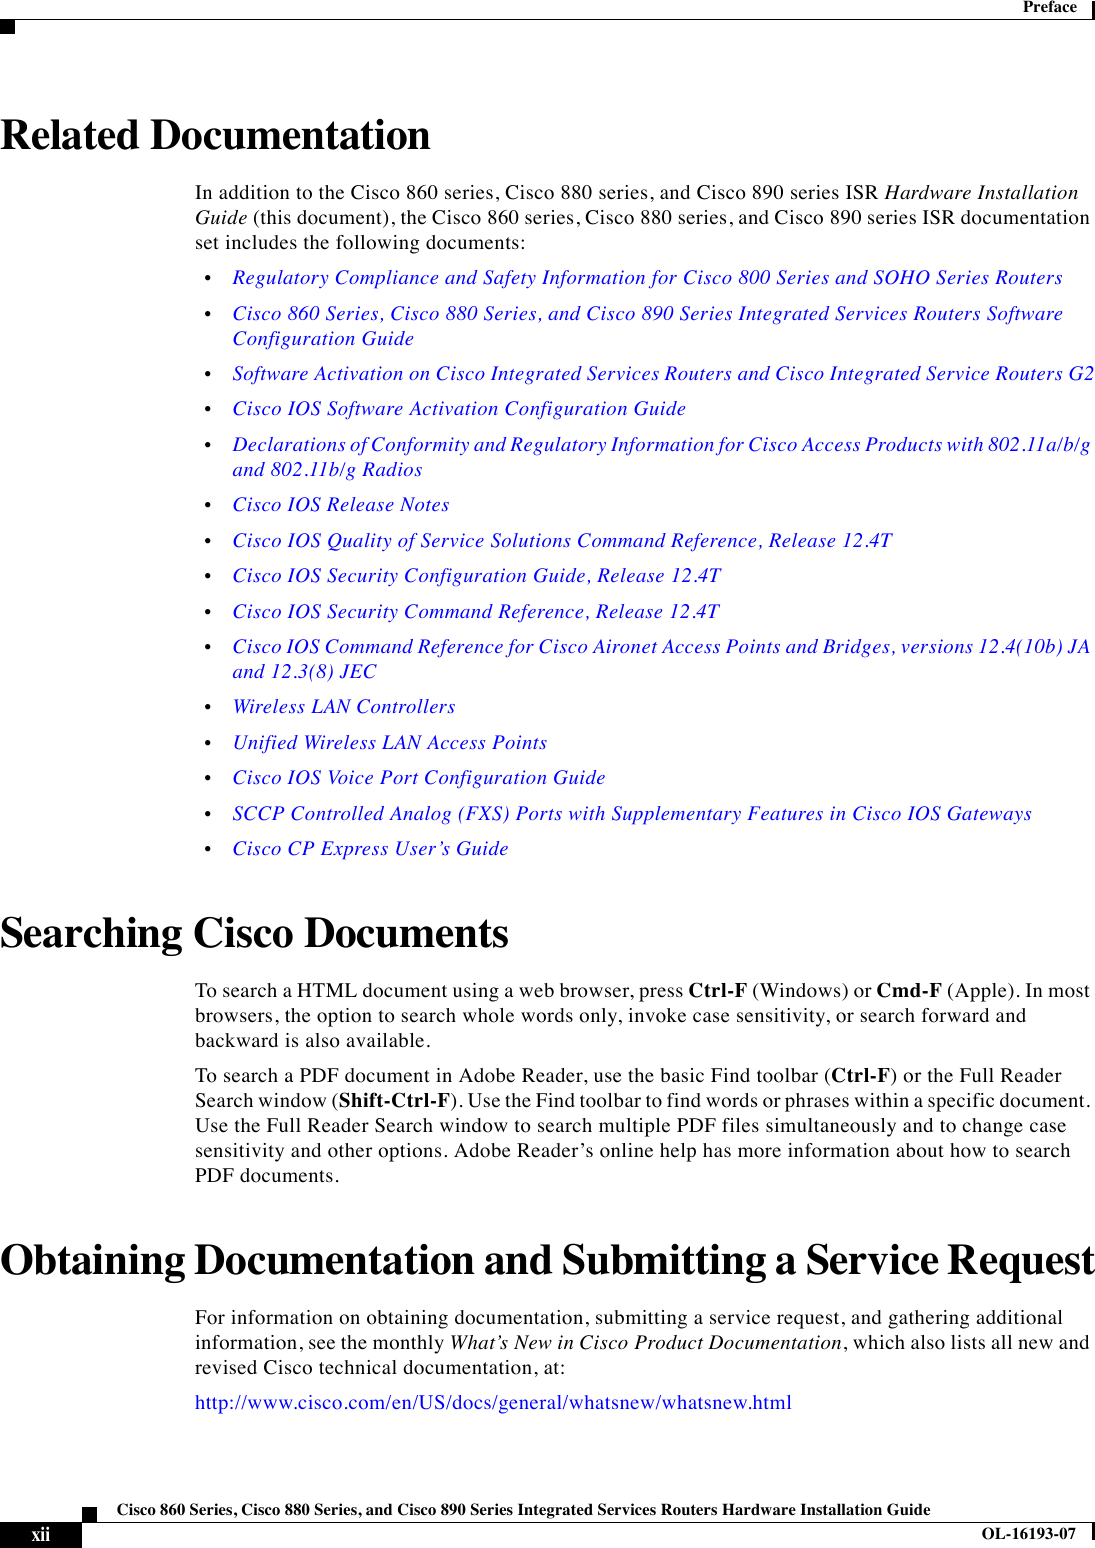  xiiCisco 860 Series, Cisco 880 Series, and Cisco 890 Series Integrated Services Routers Hardware Installation GuideOL-16193-07Preface  Related DocumentationIn addition to the Cisco 860 series, Cisco 880 series, and Cisco 890 series ISR Hardware Installation Guide (this document), the Cisco 860 series, Cisco 880 series, and Cisco 890 series ISR documentation set includes the following documents:   •Regulatory Compliance and Safety Information for Cisco 800 Series and SOHO Series Routers   •Cisco 860 Series, Cisco 880 Series, and Cisco 890 Series Integrated Services Routers Software Configuration Guide  •Software Activation on Cisco Integrated Services Routers and Cisco Integrated Service Routers G2  •Cisco IOS Software Activation Configuration Guide  •Declarations of Conformity and Regulatory Information for Cisco Access Products with 802.11a/b/g and 802.11b/g Radios  •Cisco IOS Release Notes  •Cisco IOS Quality of Service Solutions Command Reference, Release 12.4T  •Cisco IOS Security Configuration Guide, Release 12.4T  •Cisco IOS Security Command Reference, Release 12.4T  •Cisco IOS Command Reference for Cisco Aironet Access Points and Bridges, versions 12.4(10b) JA and 12.3(8) JEC  •Wireless LAN Controllers  •Unified Wireless LAN Access Points  •Cisco IOS Voice Port Configuration Guide  •SCCP Controlled Analog (FXS) Ports with Supplementary Features in Cisco IOS Gateways  •Cisco CP Express User’s GuideSearching Cisco Documents To search a HTML document using a web browser, press Ctrl-F (Windows) or Cmd-F (Apple). In most browsers, the option to search whole words only, invoke case sensitivity, or search forward and backward is also available. To search a PDF document in Adobe Reader, use the basic Find toolbar (Ctrl-F) or the Full Reader Search window (Shift-Ctrl-F). Use the Find toolbar to find words or phrases within a specific document. Use the Full Reader Search window to search multiple PDF files simultaneously and to change case sensitivity and other options. Adobe Reader’s online help has more information about how to search PDF documents. Obtaining Documentation and Submitting a Service RequestFor information on obtaining documentation, submitting a service request, and gathering additional information, see the monthly What’s New in Cisco Product Documentation, which also lists all new and revised Cisco technical documentation, at:http://www.cisco.com/en/US/docs/general/whatsnew/whatsnew.html